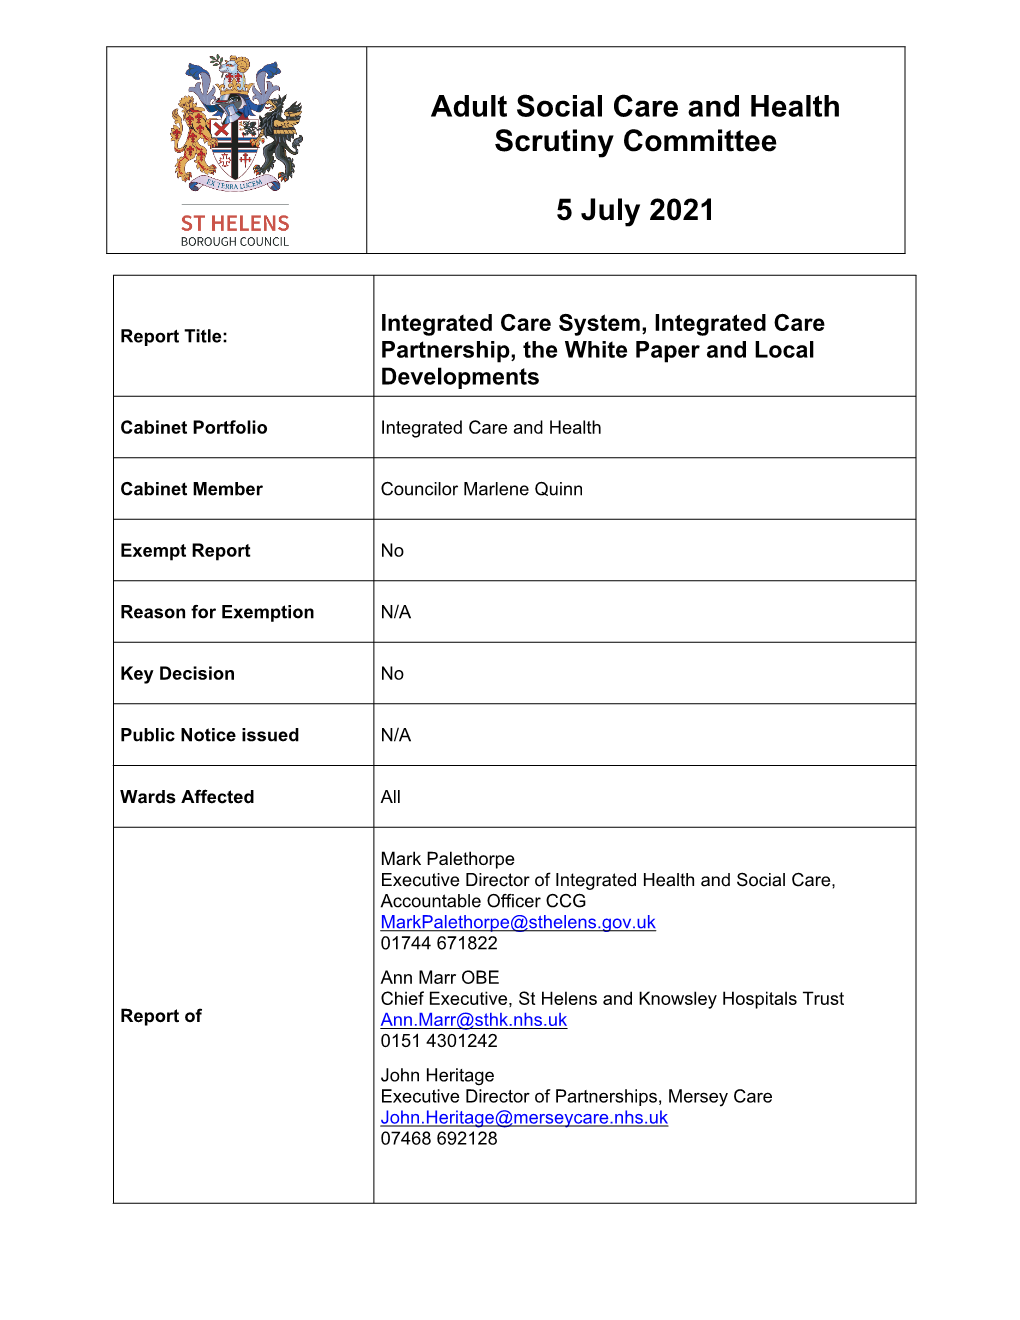 Adult Social Care and Health Scrutiny Committee 5 July 2021